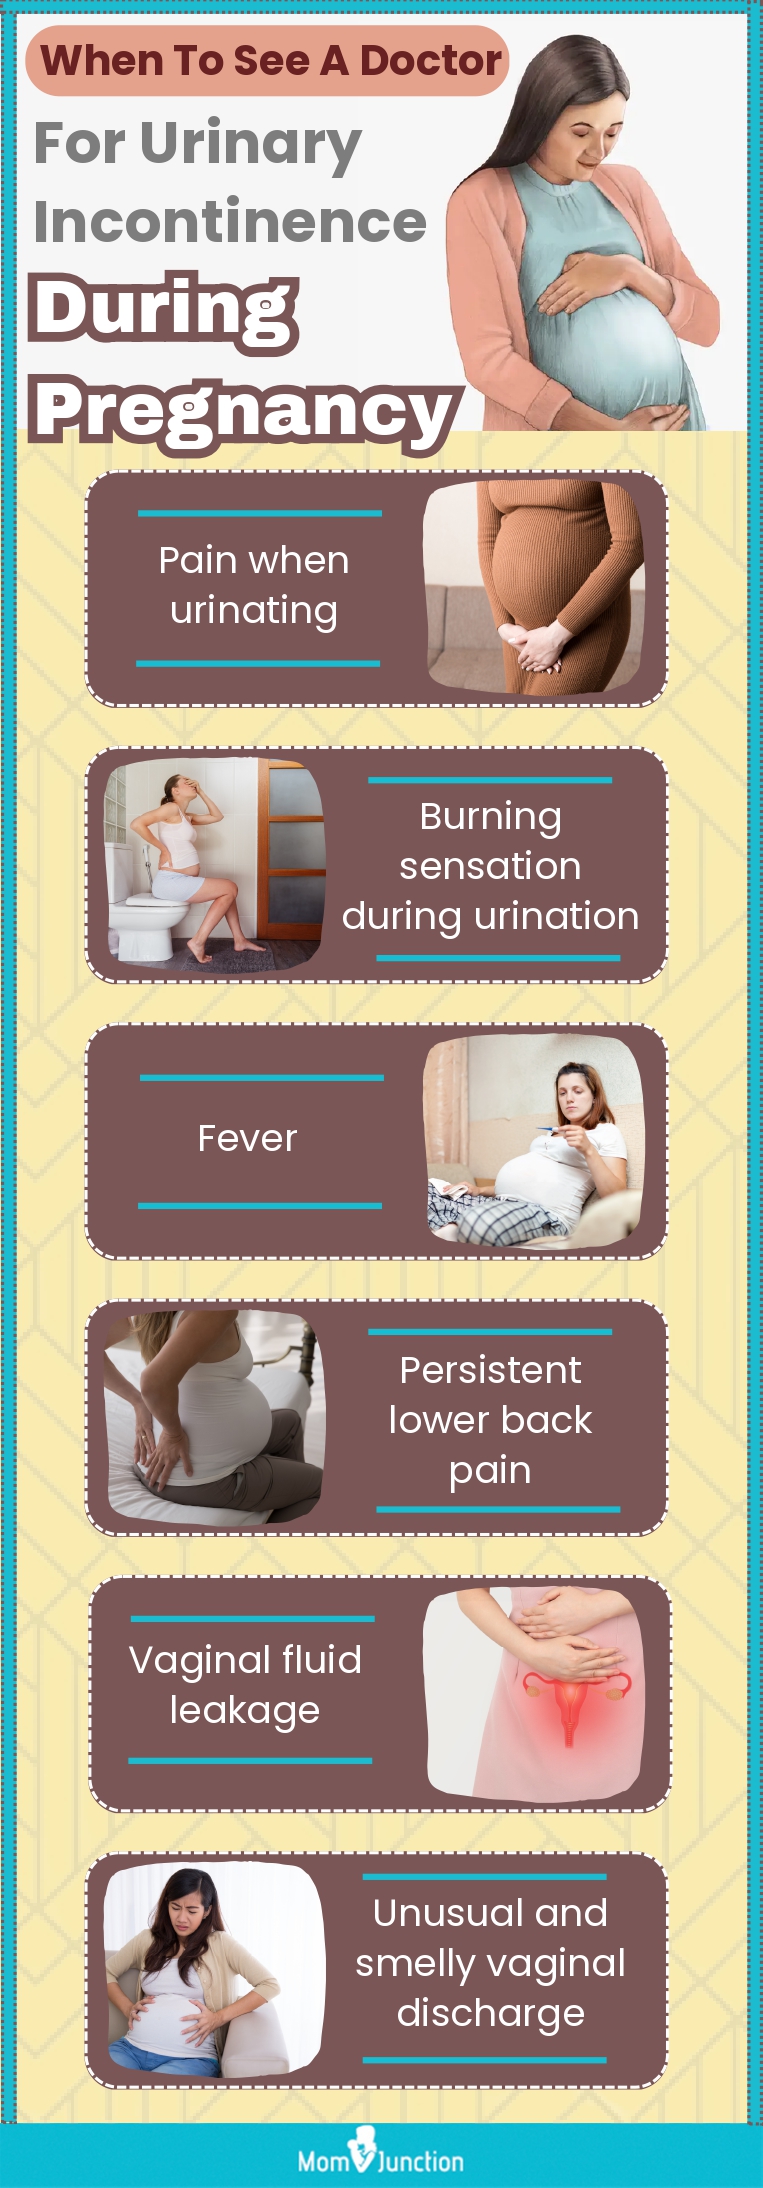 3 Common Urinary and Vaginal Pregnancy Problems - FamilyEducation